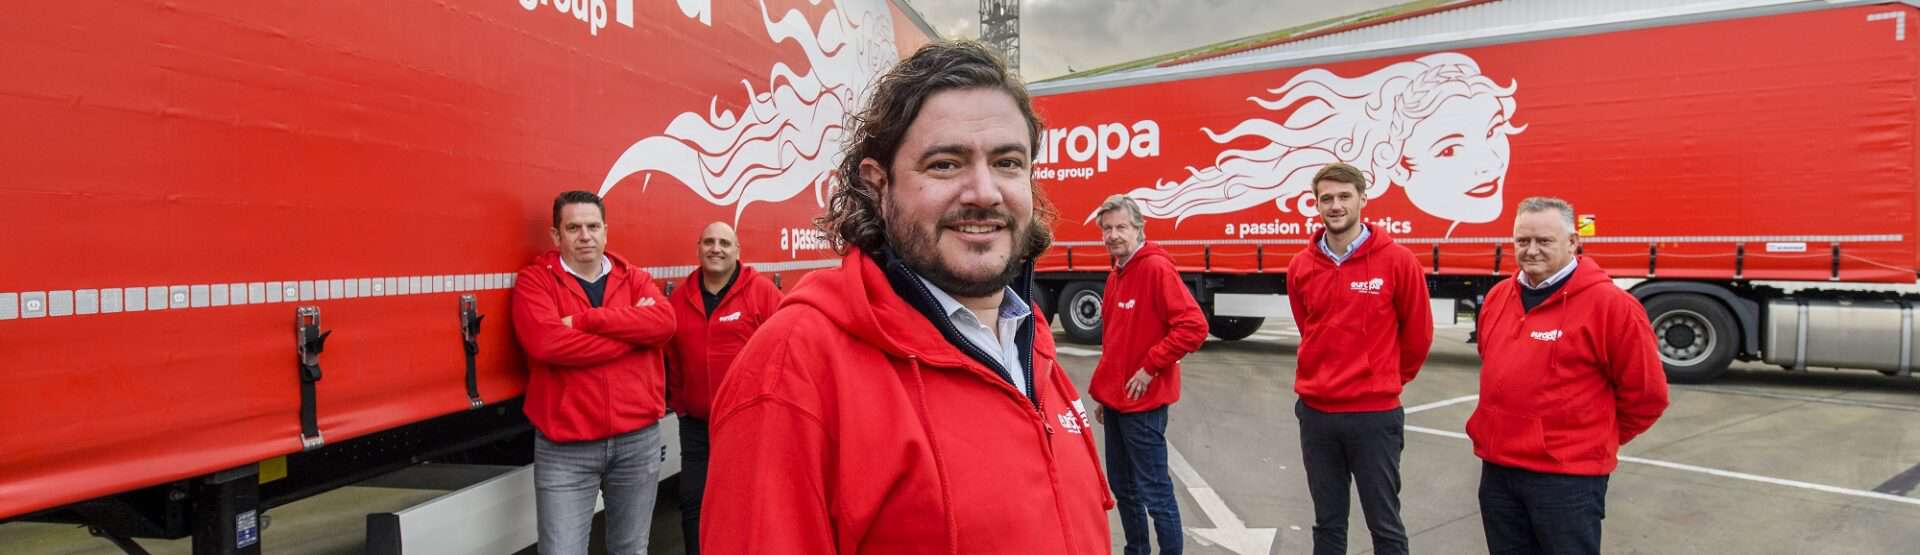 Carlo Turner and team stand in red, branded Europa hoodies in front of two Europa Road trucks.